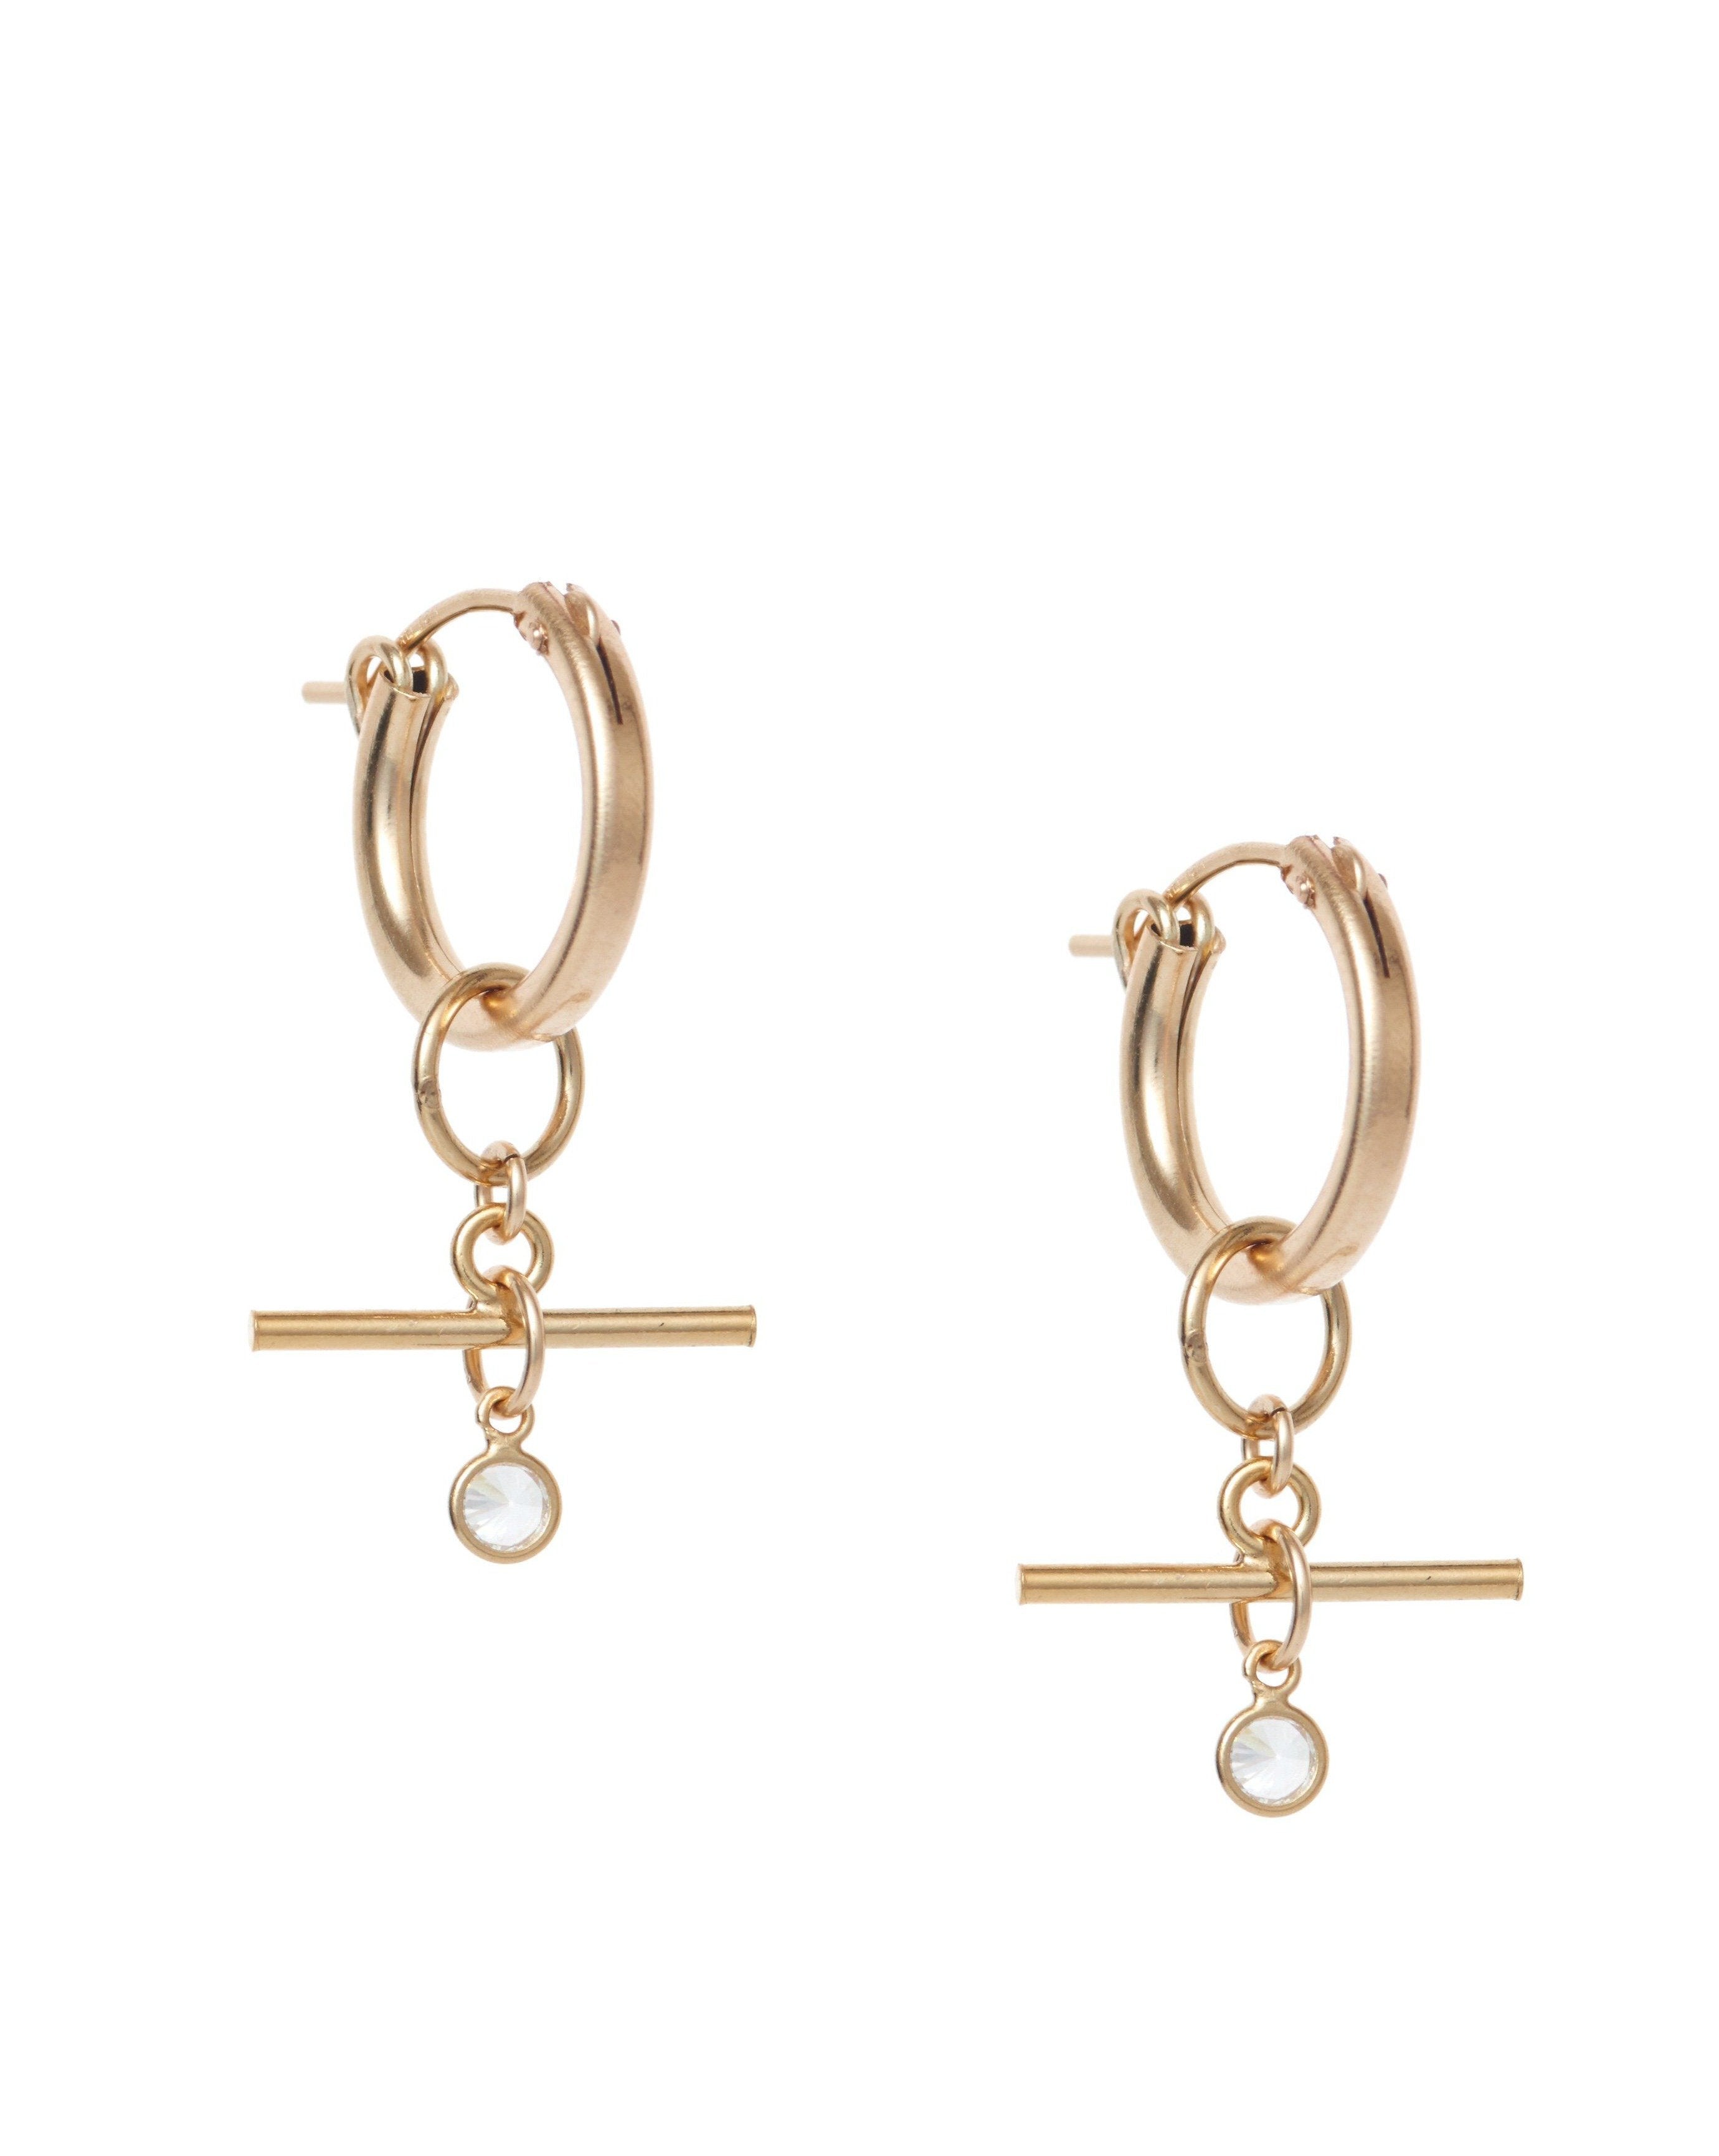 Tanya Earrings by KOZAKH. 15mm snap closure hoop earrings, crafted in 14K Gold Filled, featuring a dangling horizontal bar and a 3mm Cubic Zirconia Bezel.